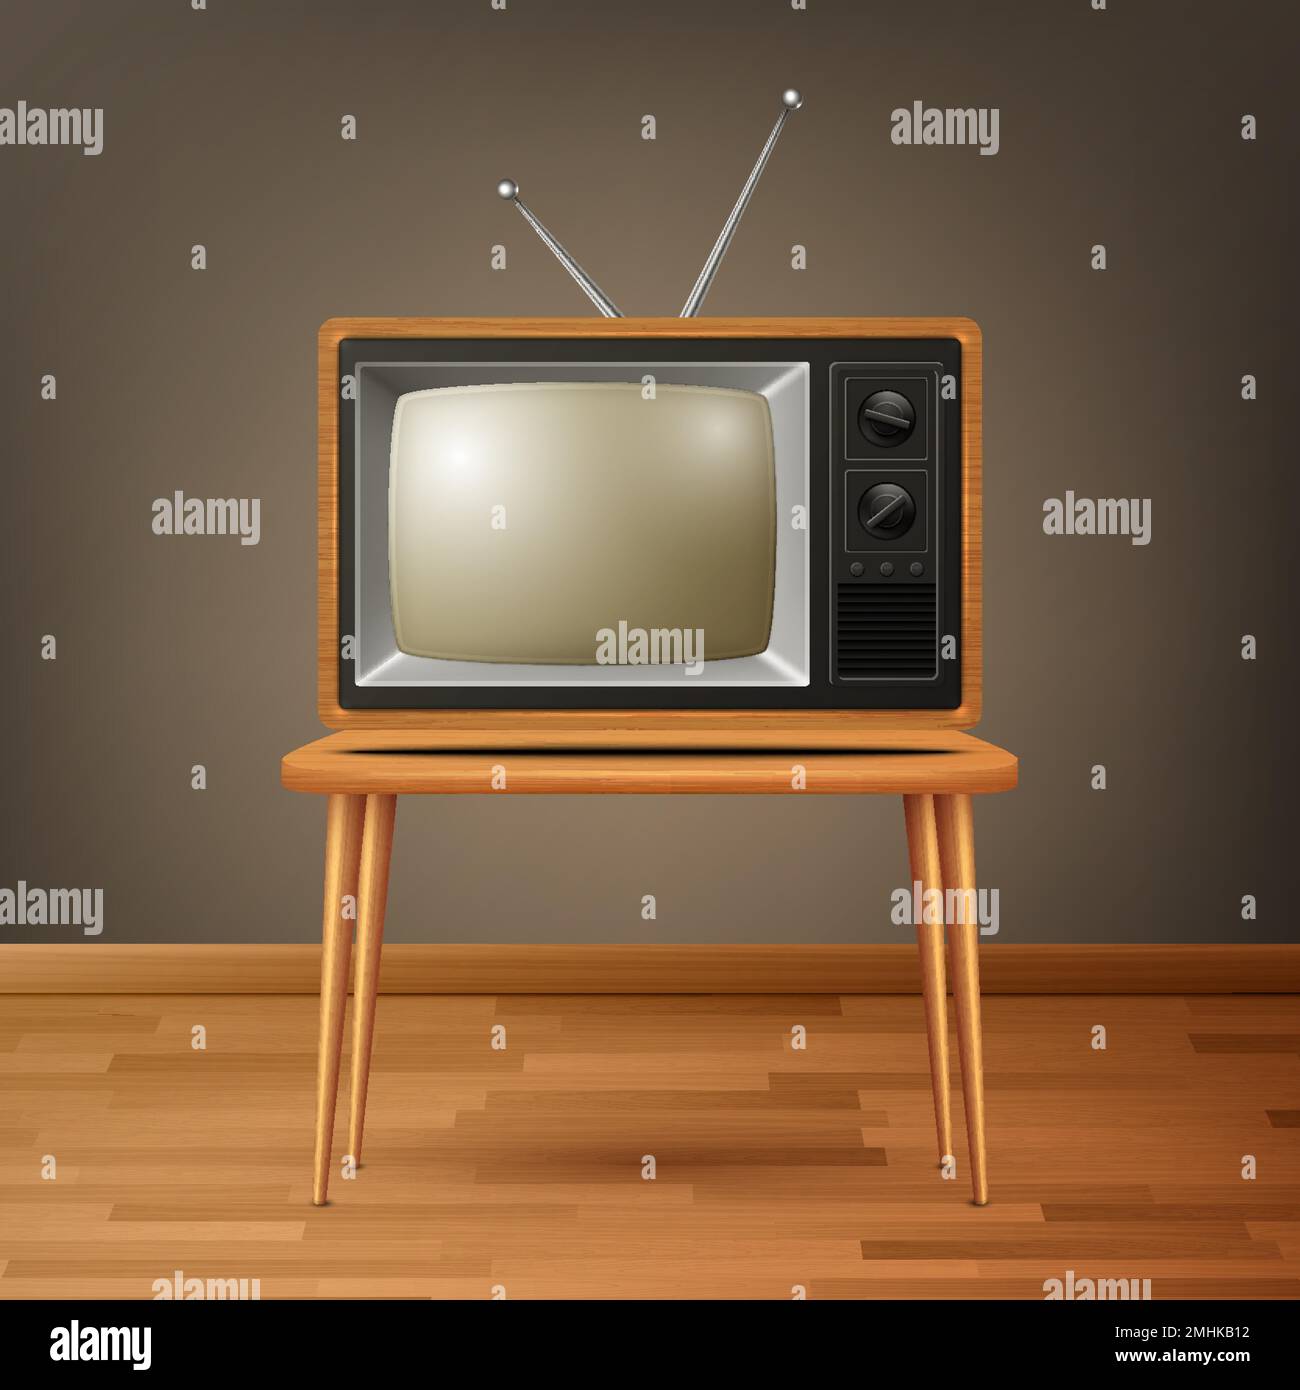 Vector 3d Realistic Brown Wooden Retro TV Receiver on Wooden Table. Home Interior Design Concept. Vintage TV Set, Television, Front View Stock Vector